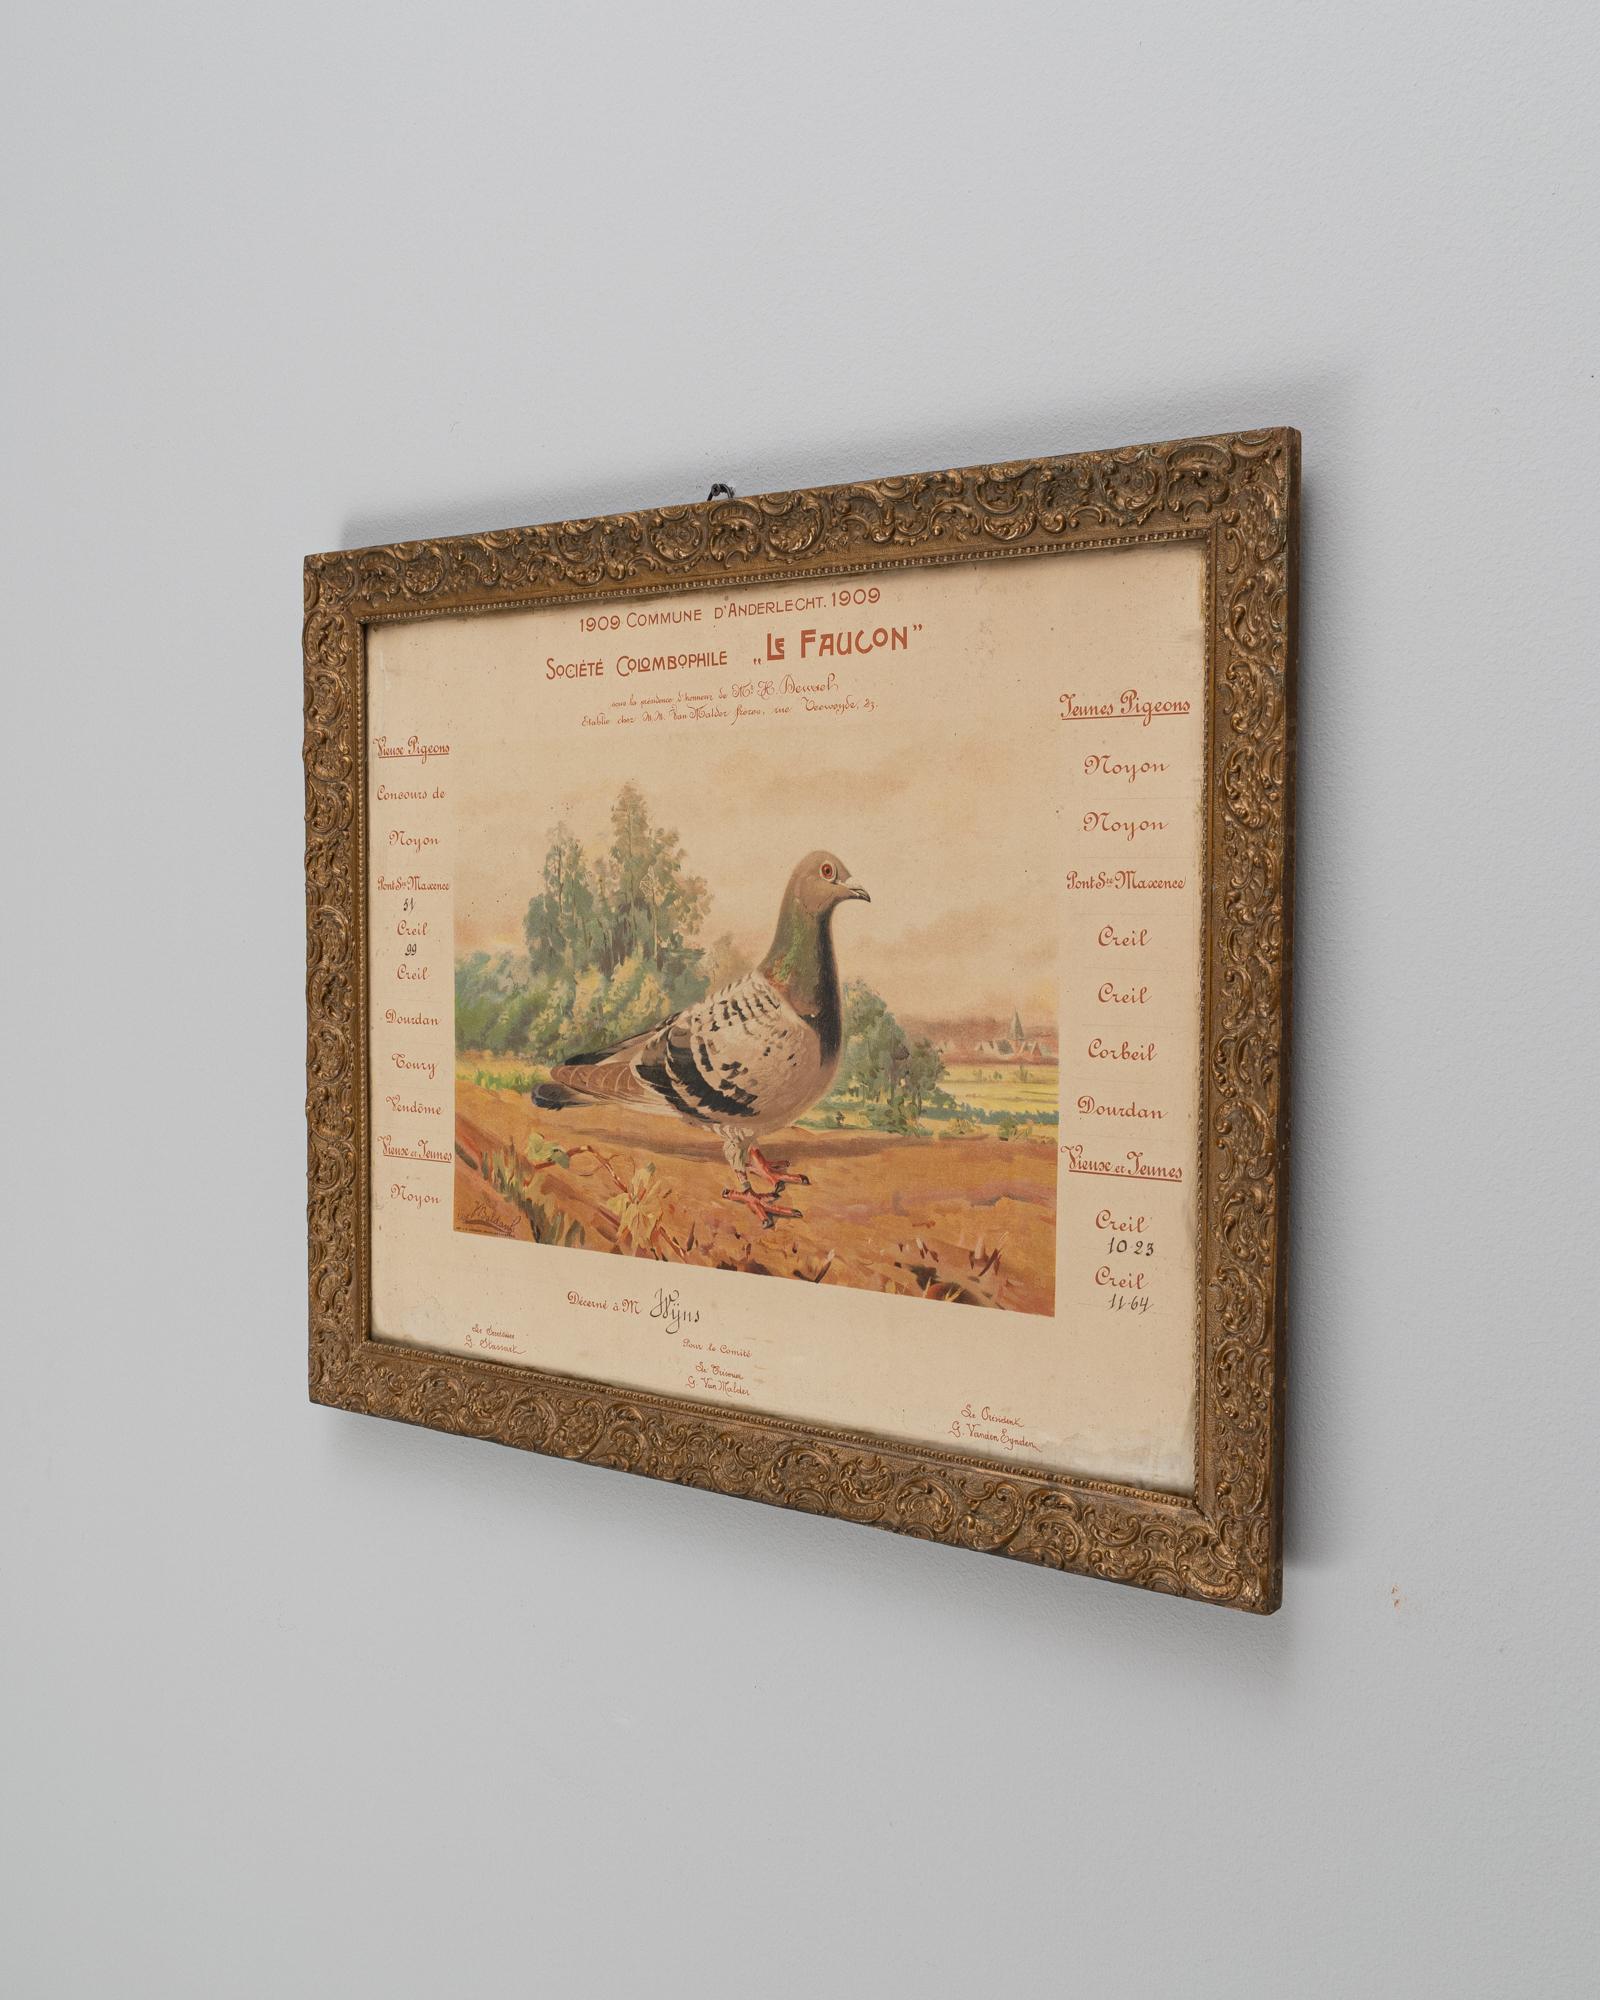 This delightful 20th-century Belgian artwork encapsulates the charm of rural life with its serene portrayal of a pigeon, set against the backdrop of a pastoral landscape. The attention to detail in the bird's feathers and the gentle hues of the